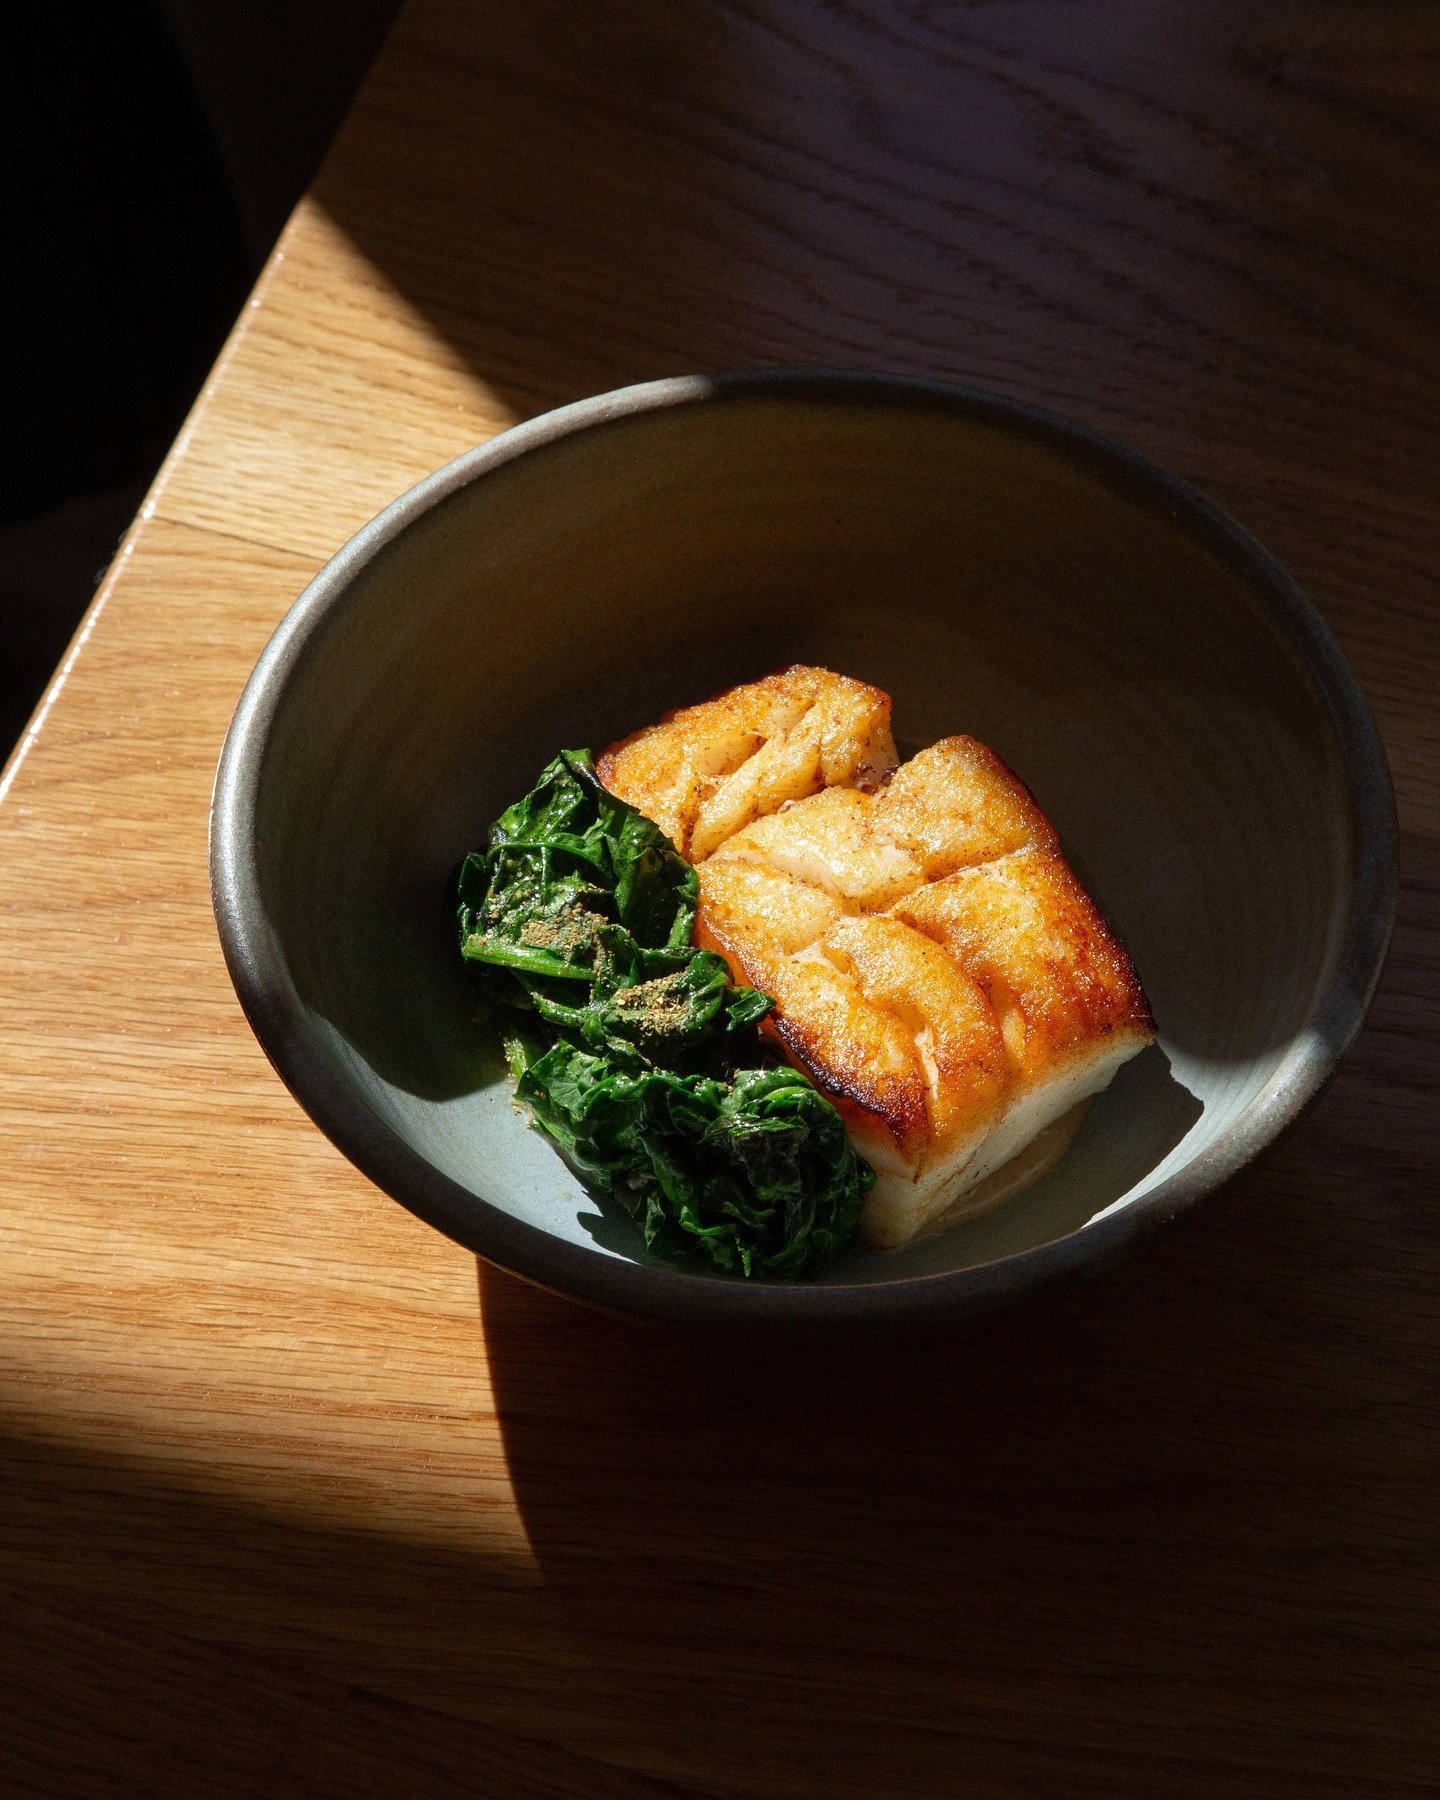 New for spring: Pan-seared Icelandic cod, getting its glow on. Served with creamy sourdough pur&eacute;e &amp; lightly charred spinach dressed up with a wasabi-citrus kick.